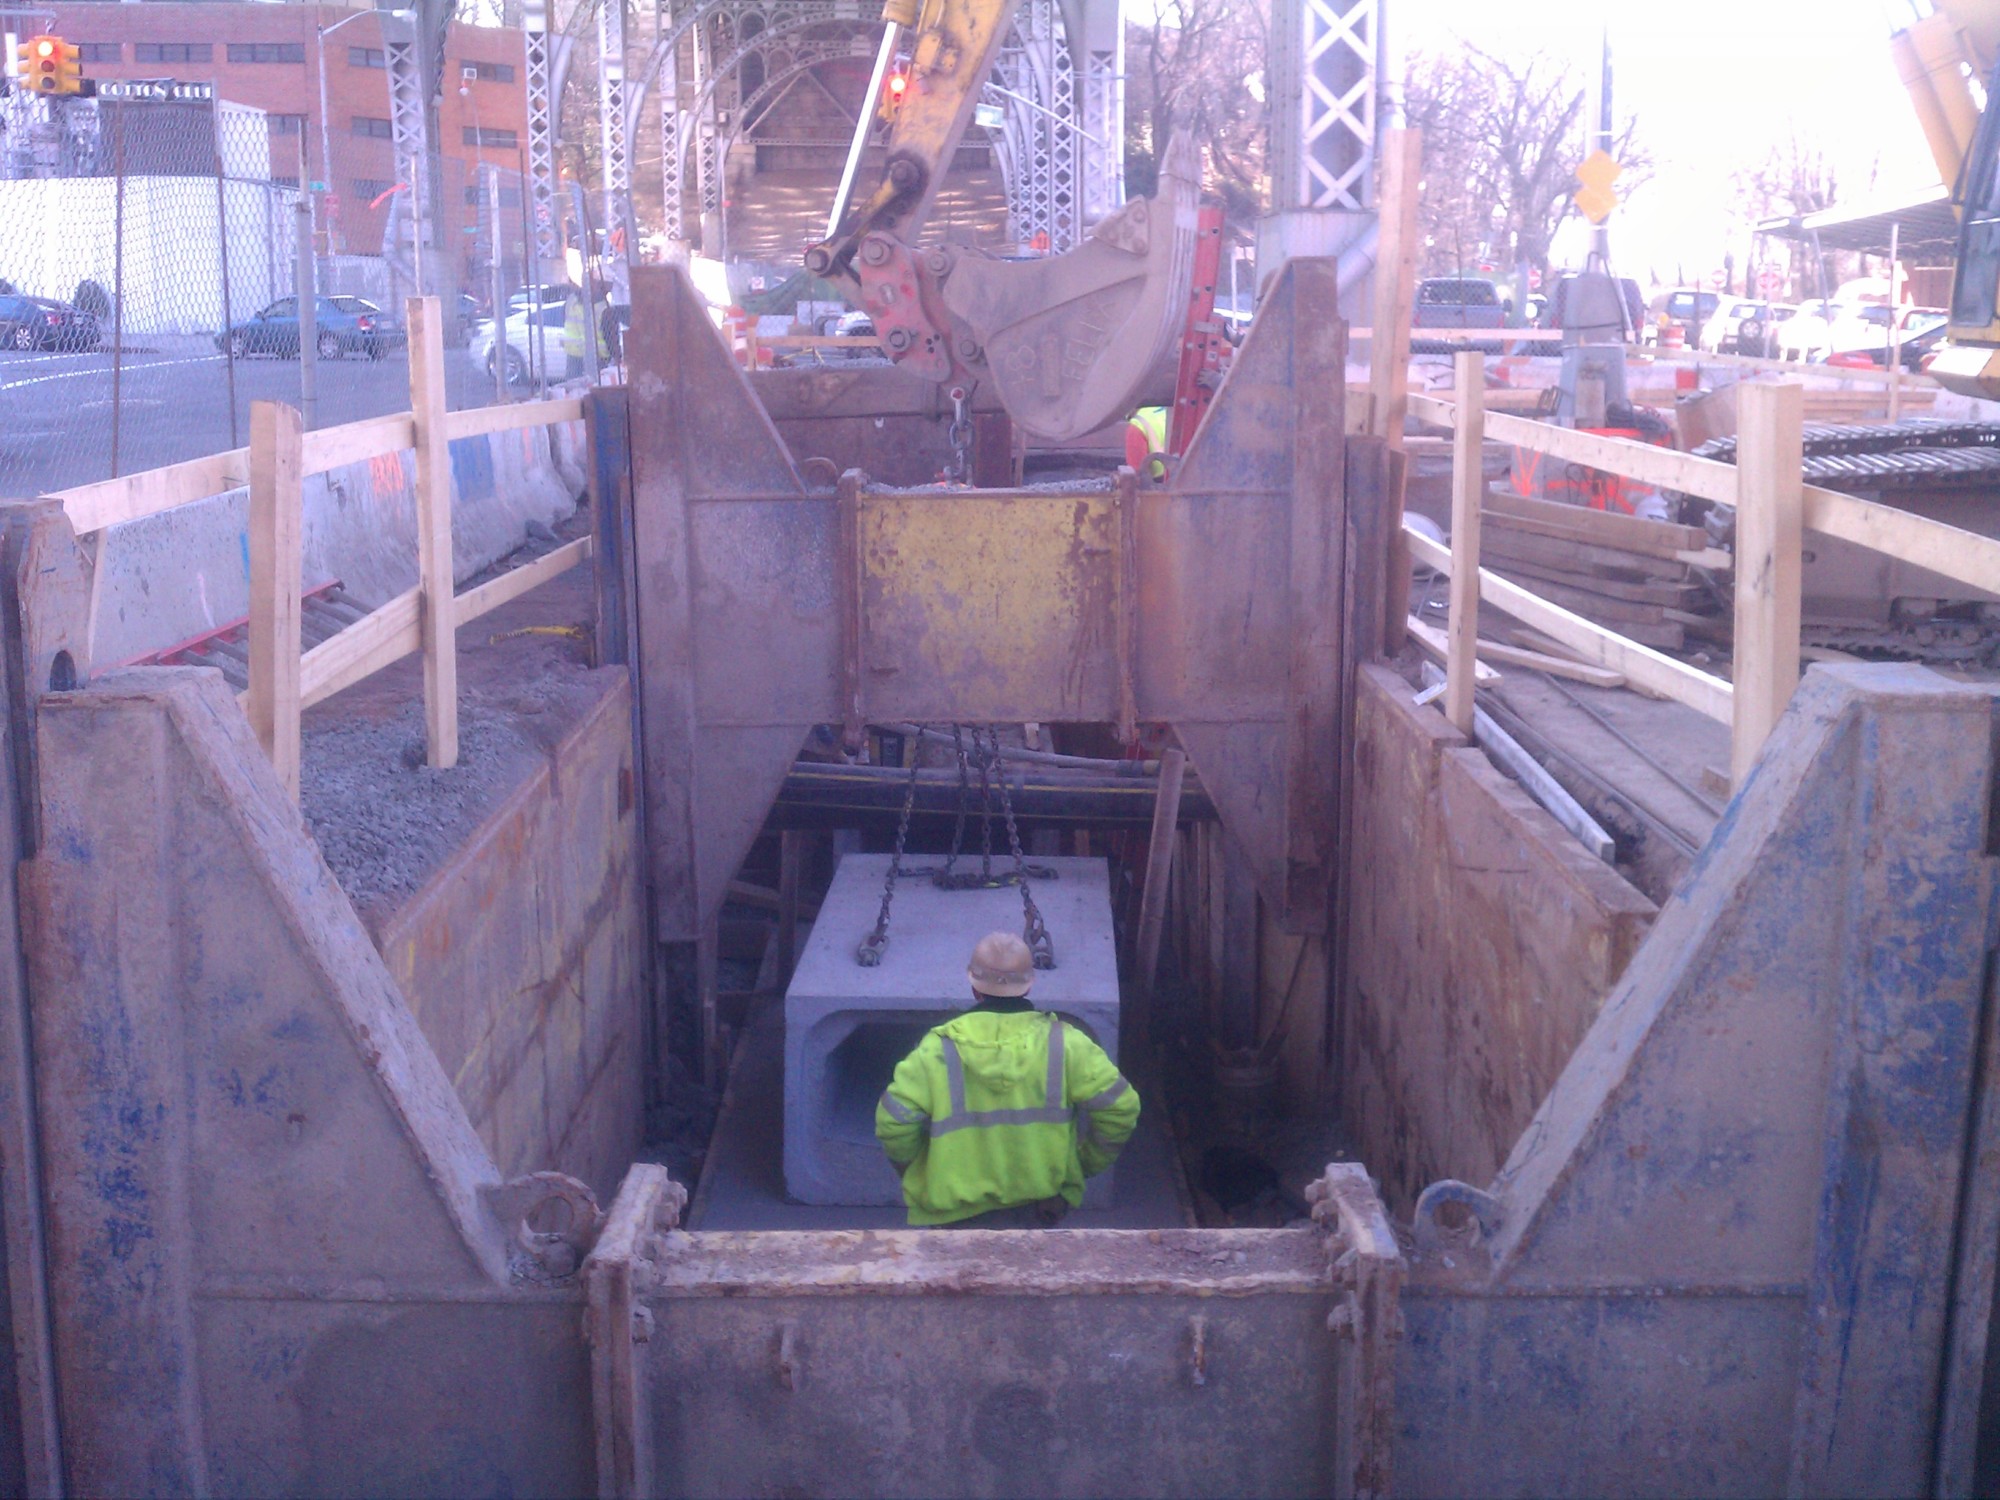 Columbia 12th Ave Sewer 2 -12th Avenue Storm Sewer Project -construction by MFM Contracting Corp New York